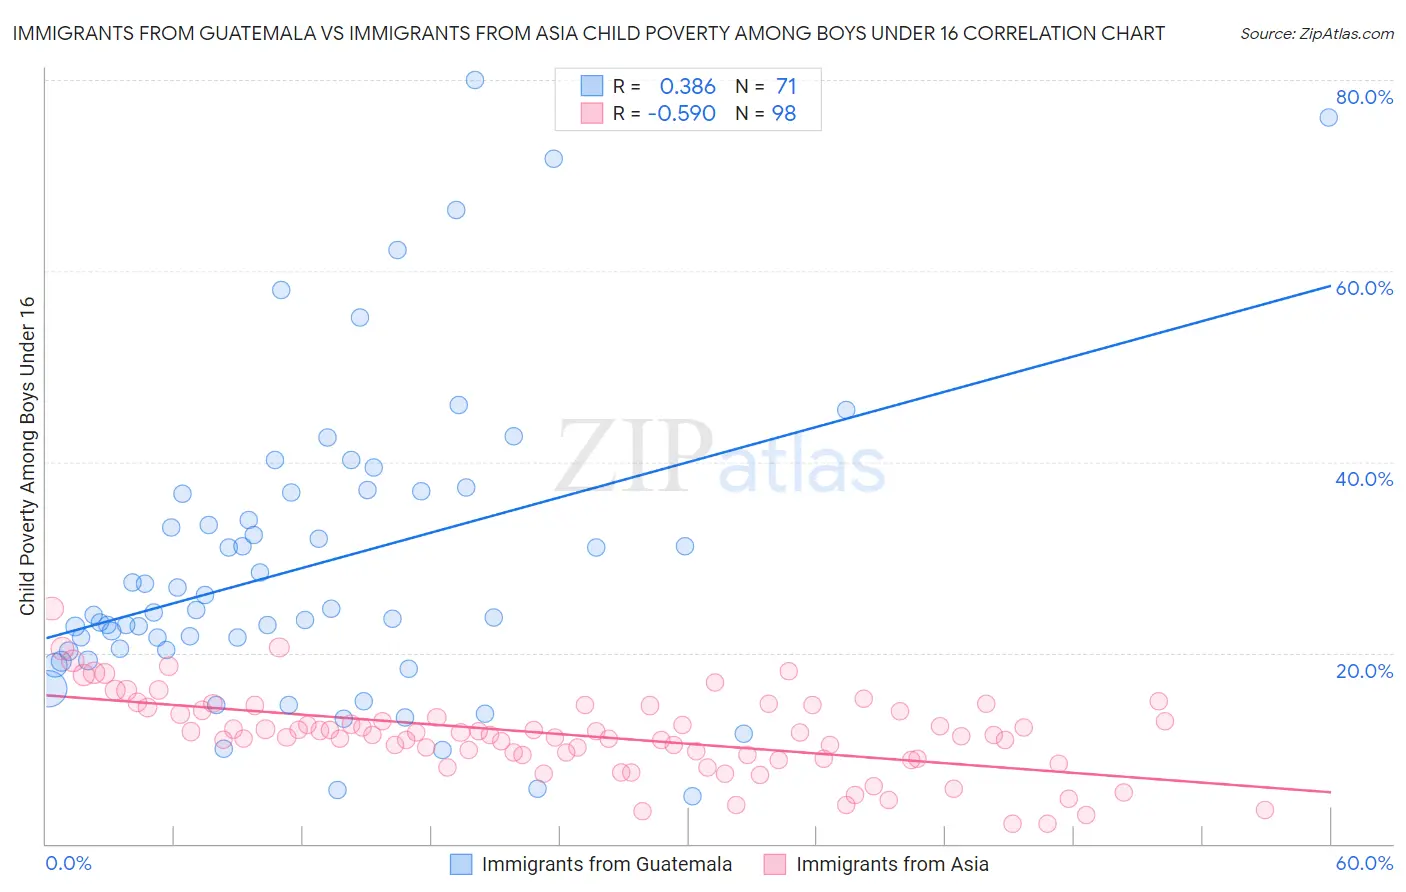 Immigrants from Guatemala vs Immigrants from Asia Child Poverty Among Boys Under 16